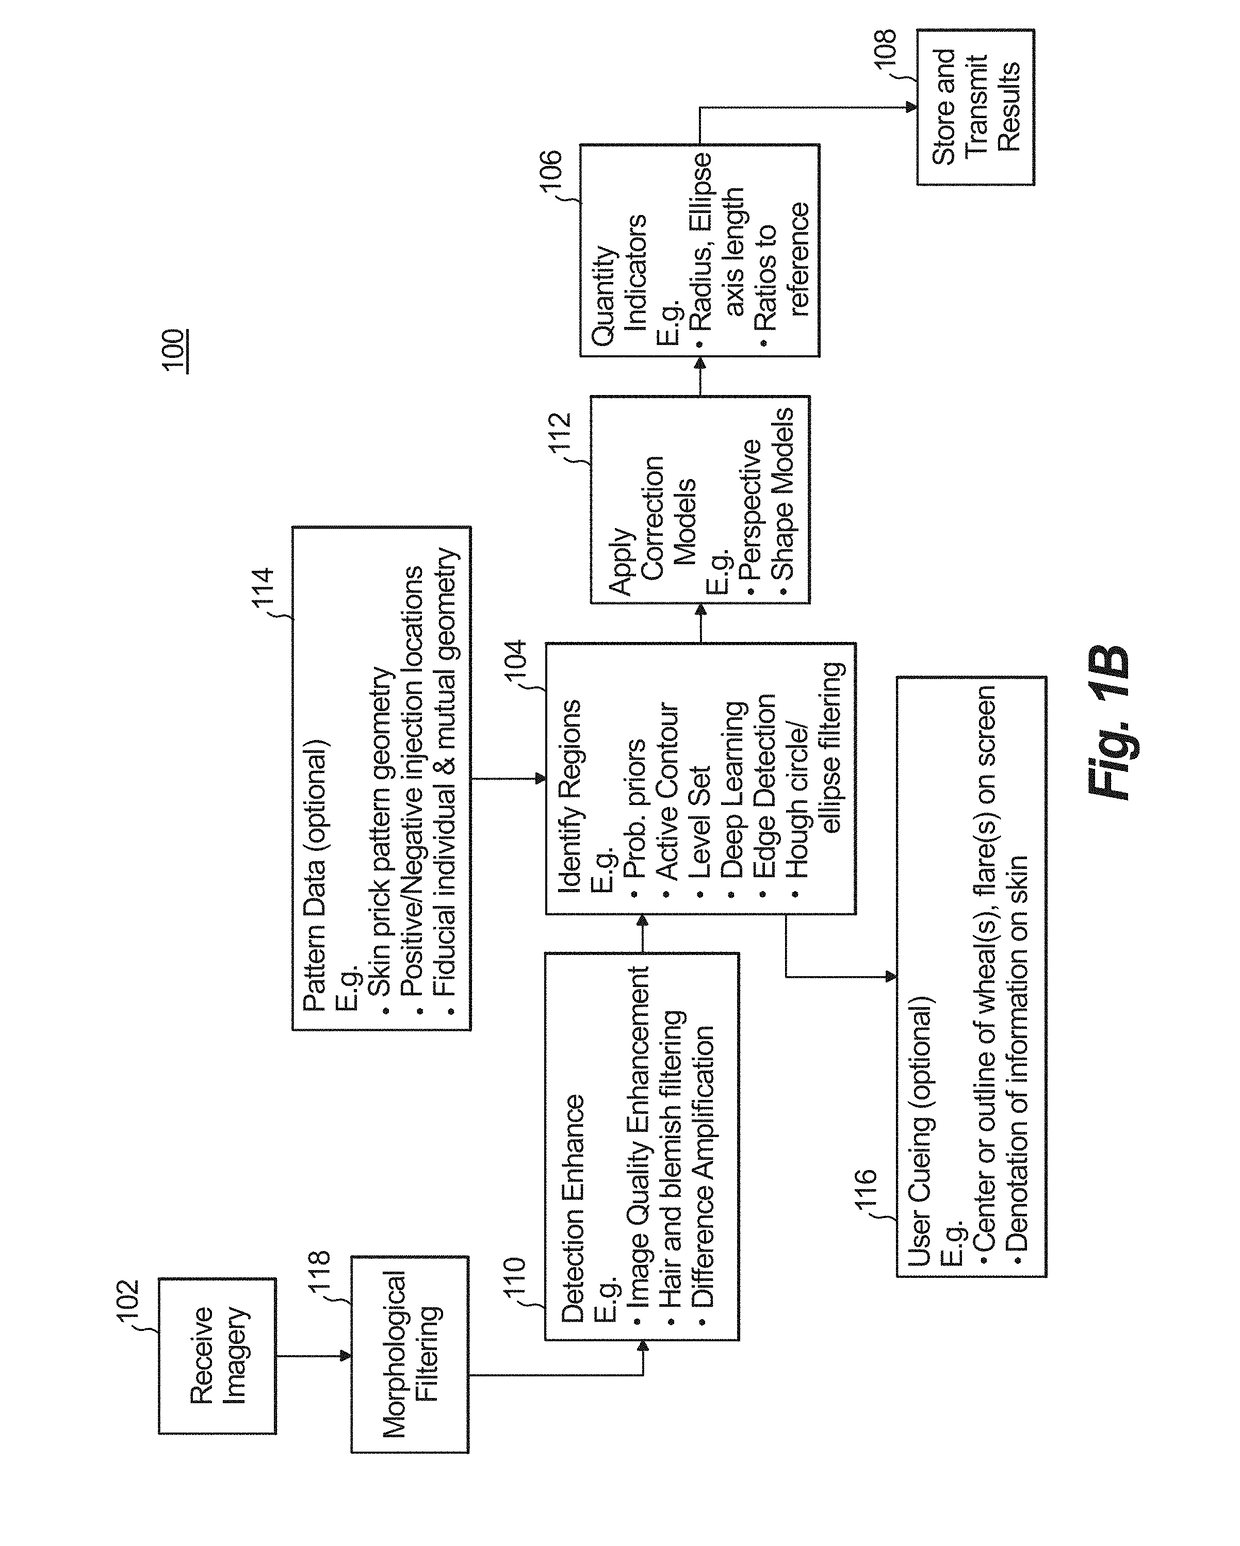 Systems and methods for image-based quantification for allergen skin reaction